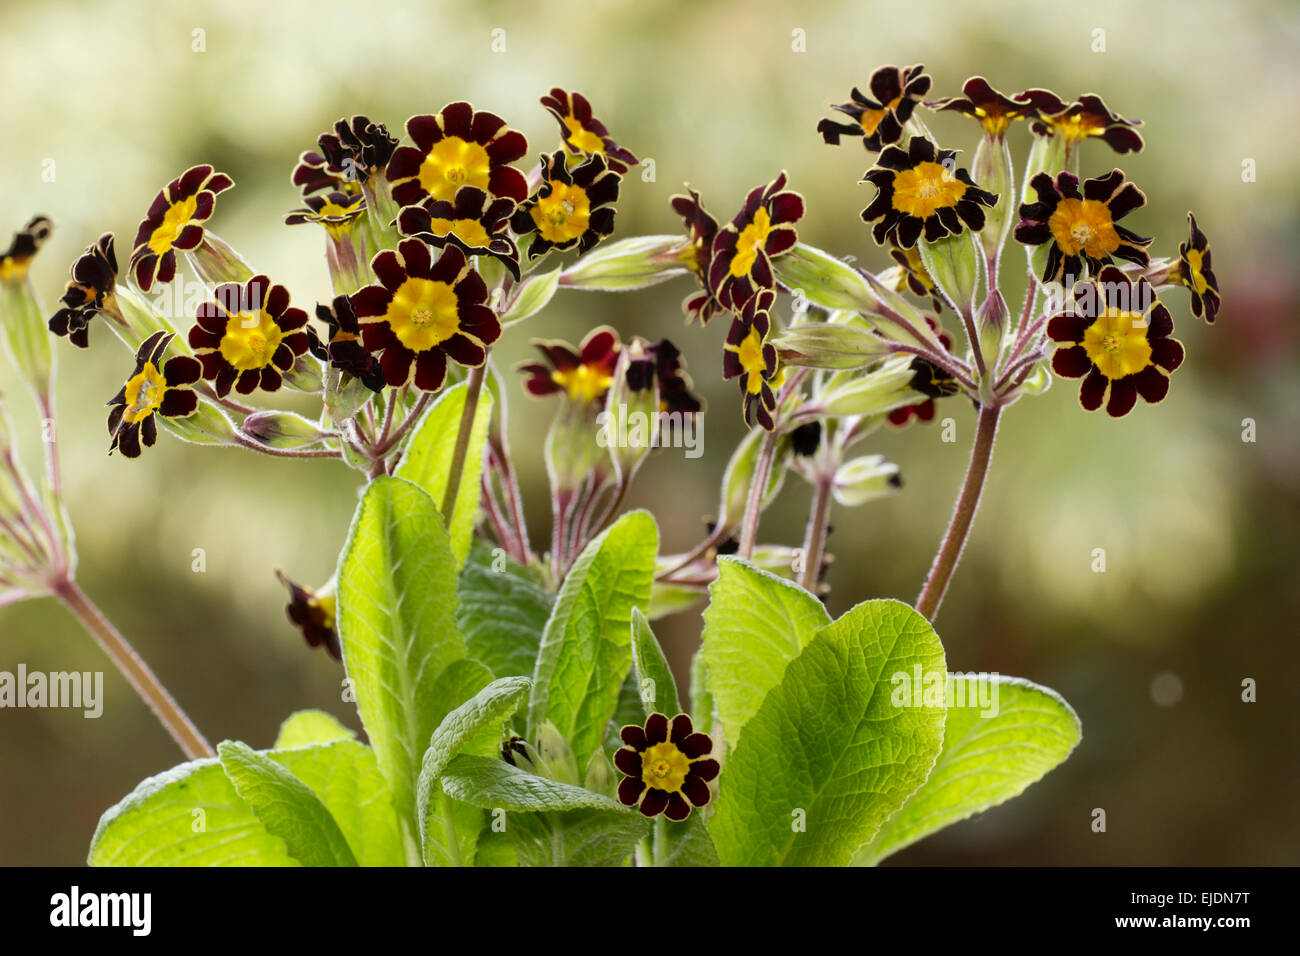 Flower heads of the small gold laced polyanthus, Primula elatior 'Victoriana Gold Lace' Stock Photo